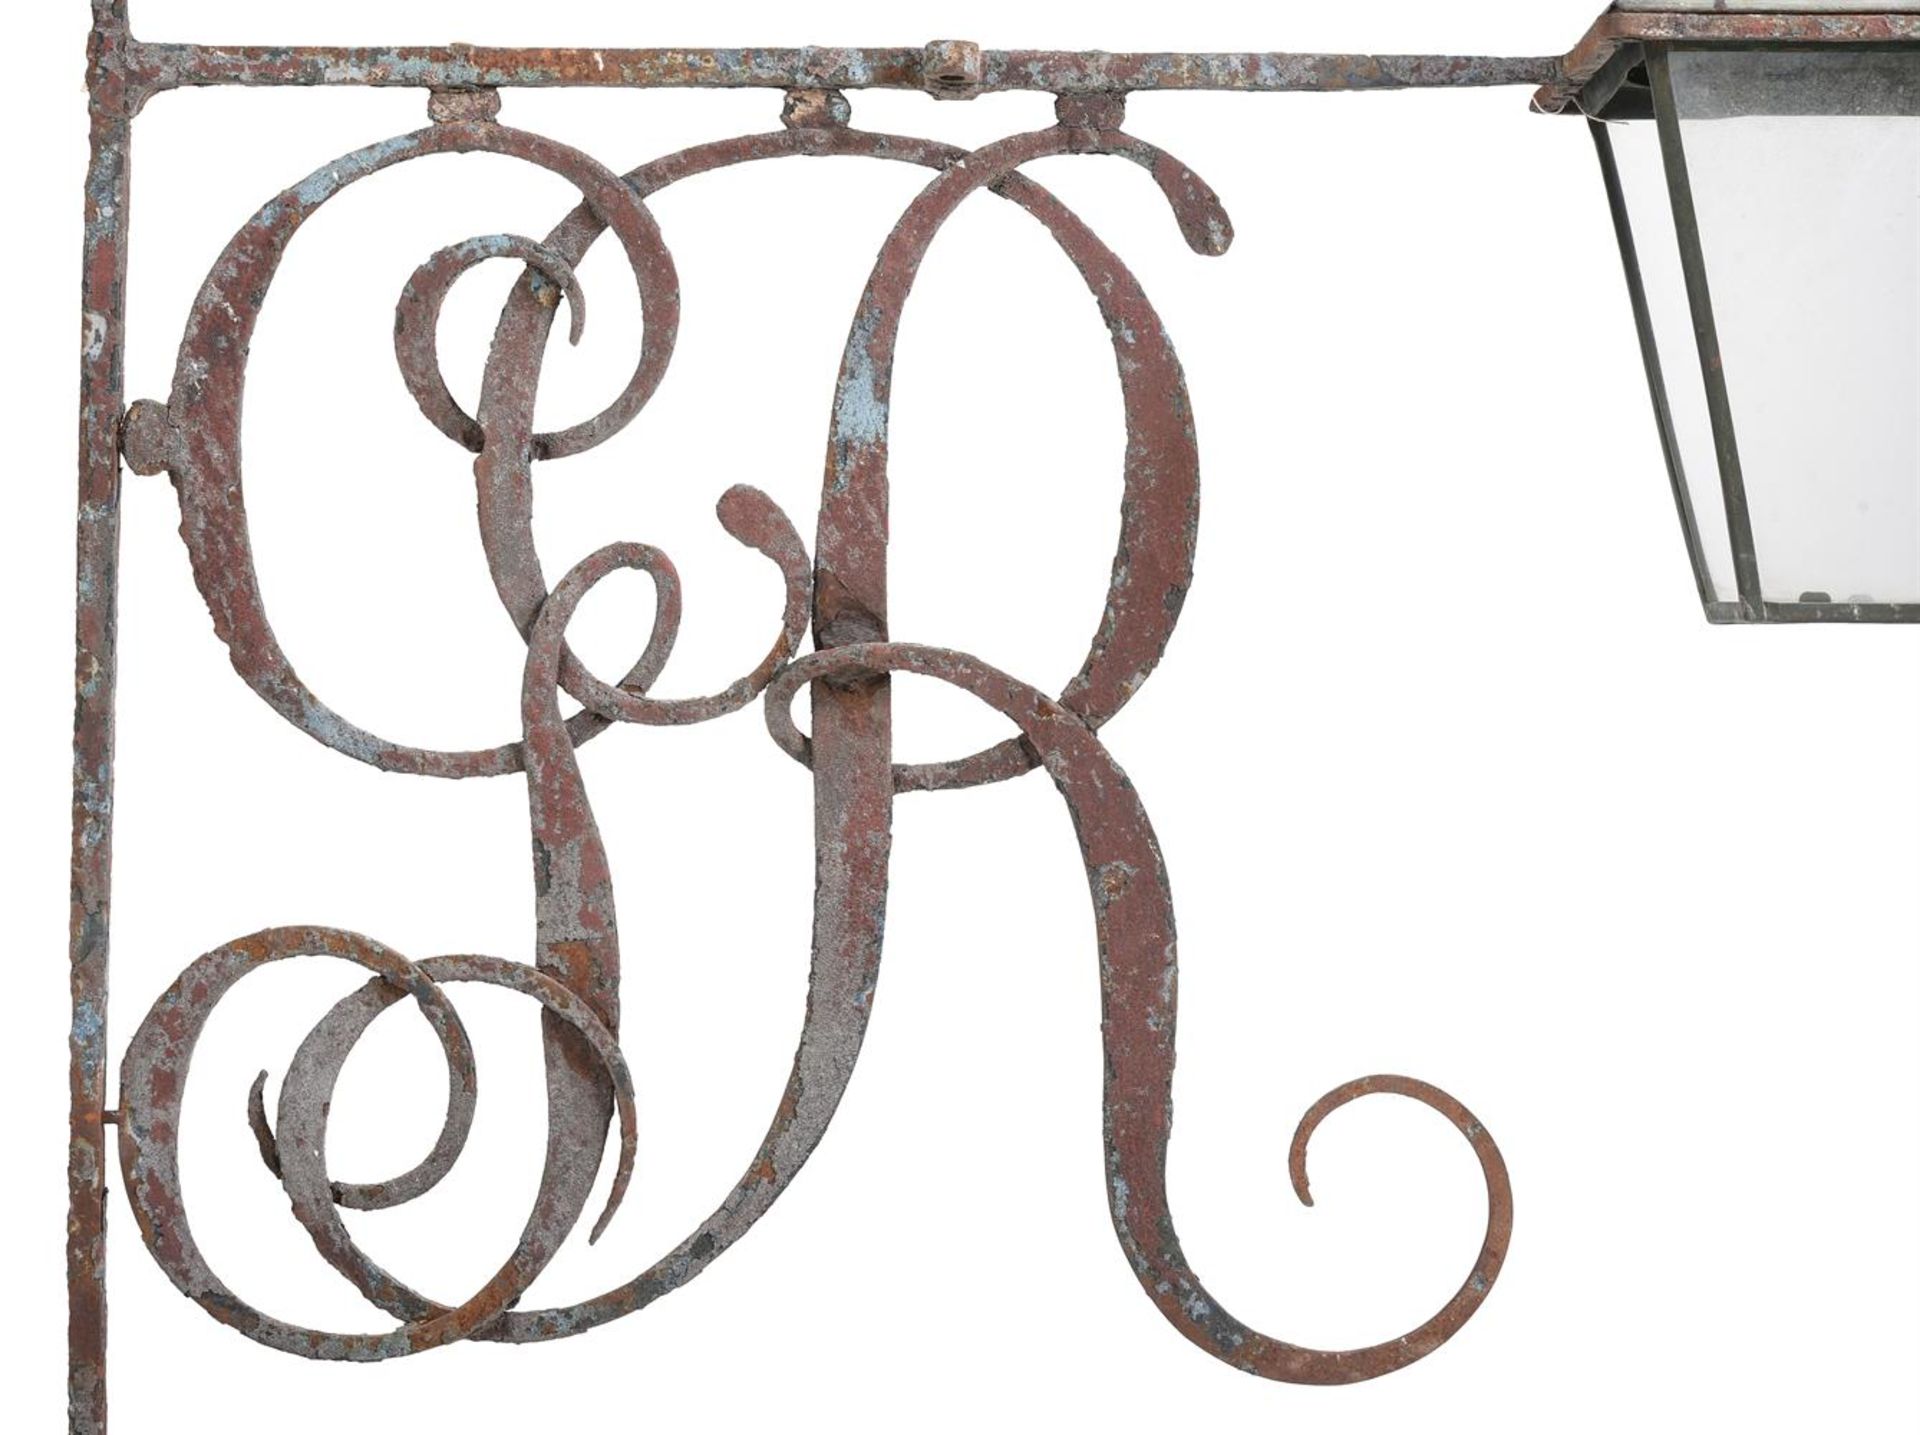 A LARGE GEORGE III WROUGHT IRON CYPHER LANTERN BRACKET, LATE 18TH OR EARLY 19TH CENTURY - Image 2 of 3